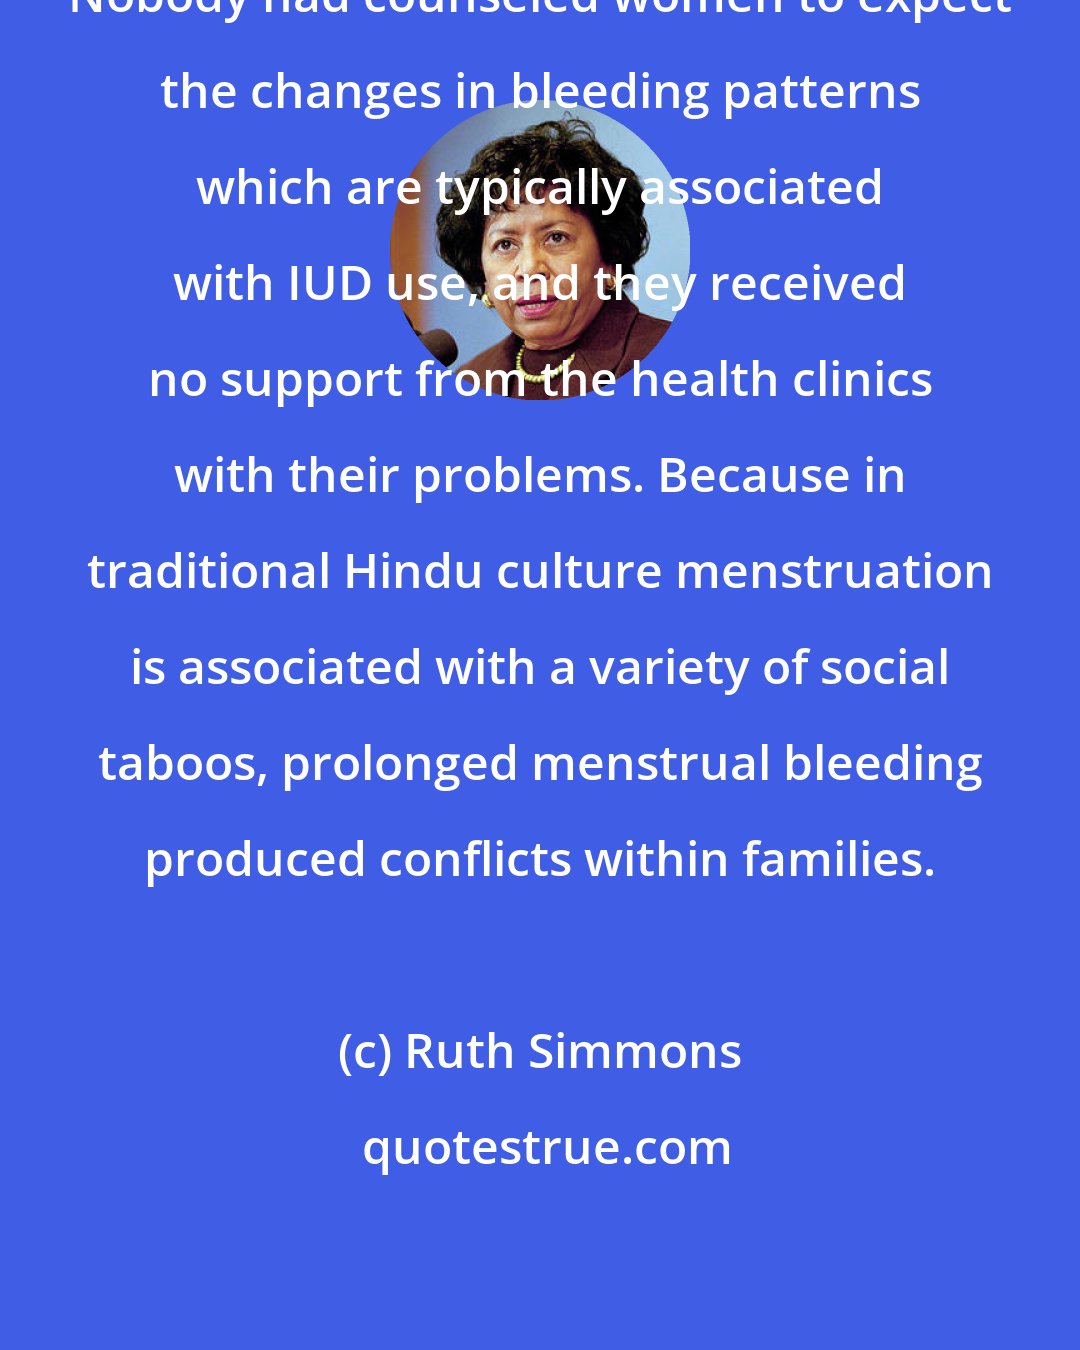 Ruth Simmons: Nobody had counseled women to expect the changes in bleeding patterns which are typically associated with IUD use, and they received no support from the health clinics with their problems. Because in traditional Hindu culture menstruation is associated with a variety of social taboos, prolonged menstrual bleeding produced conflicts within families.